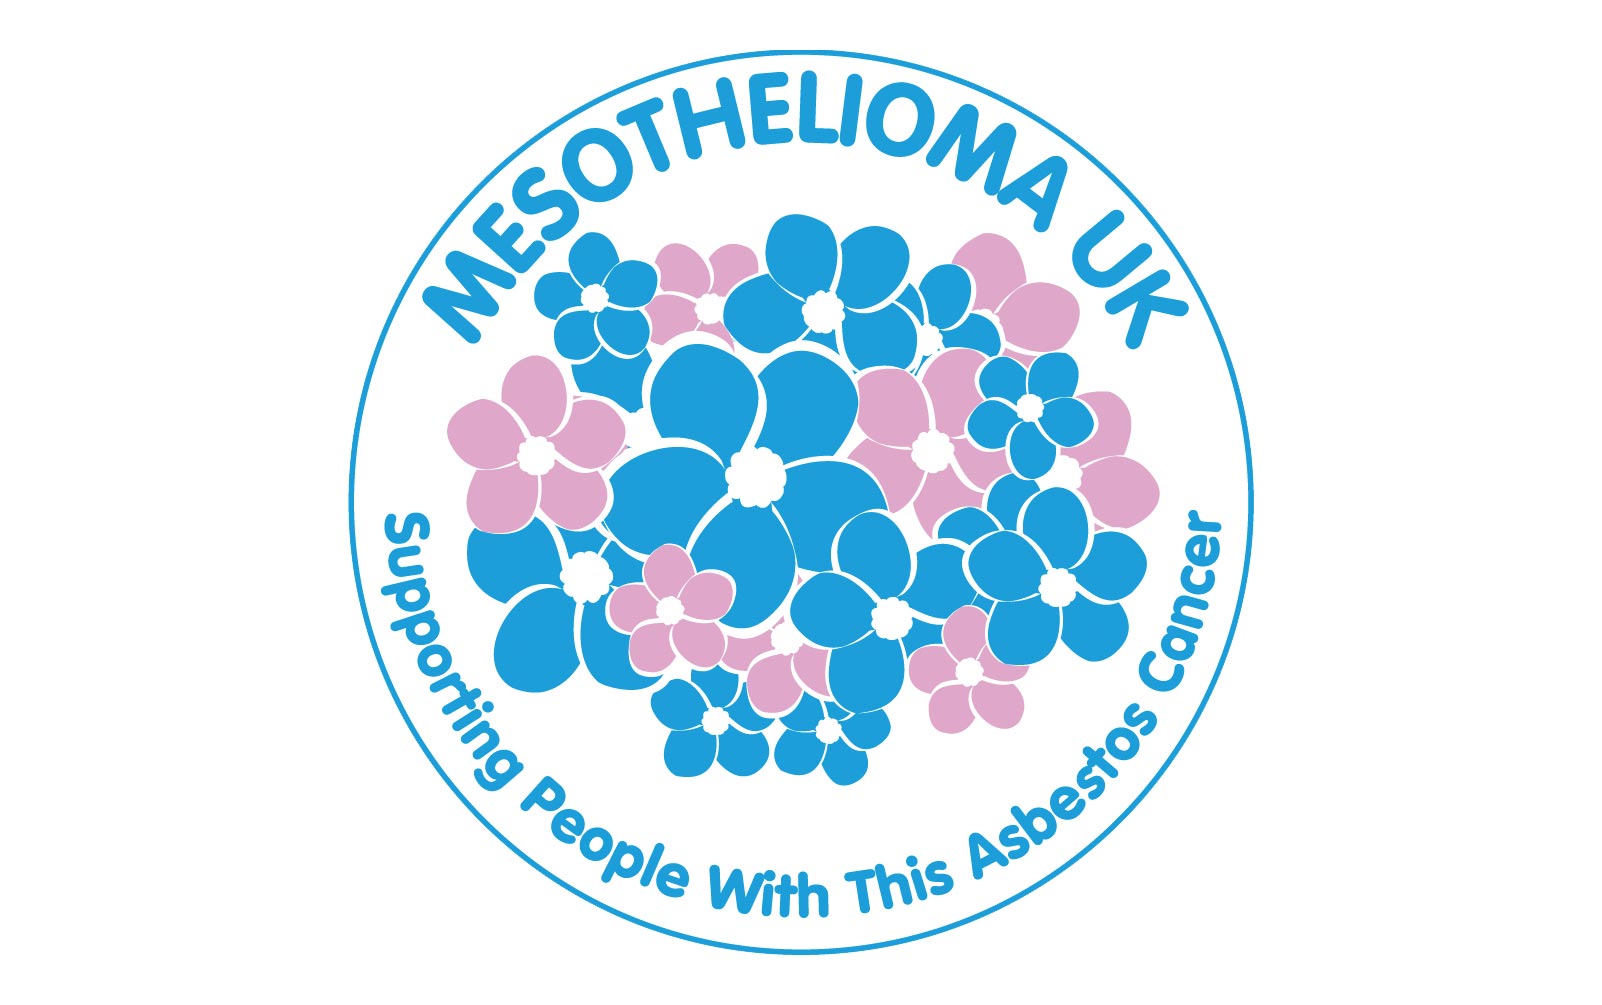 Making Mesothelioma Patient Research Happen: The United Kingdom Experience